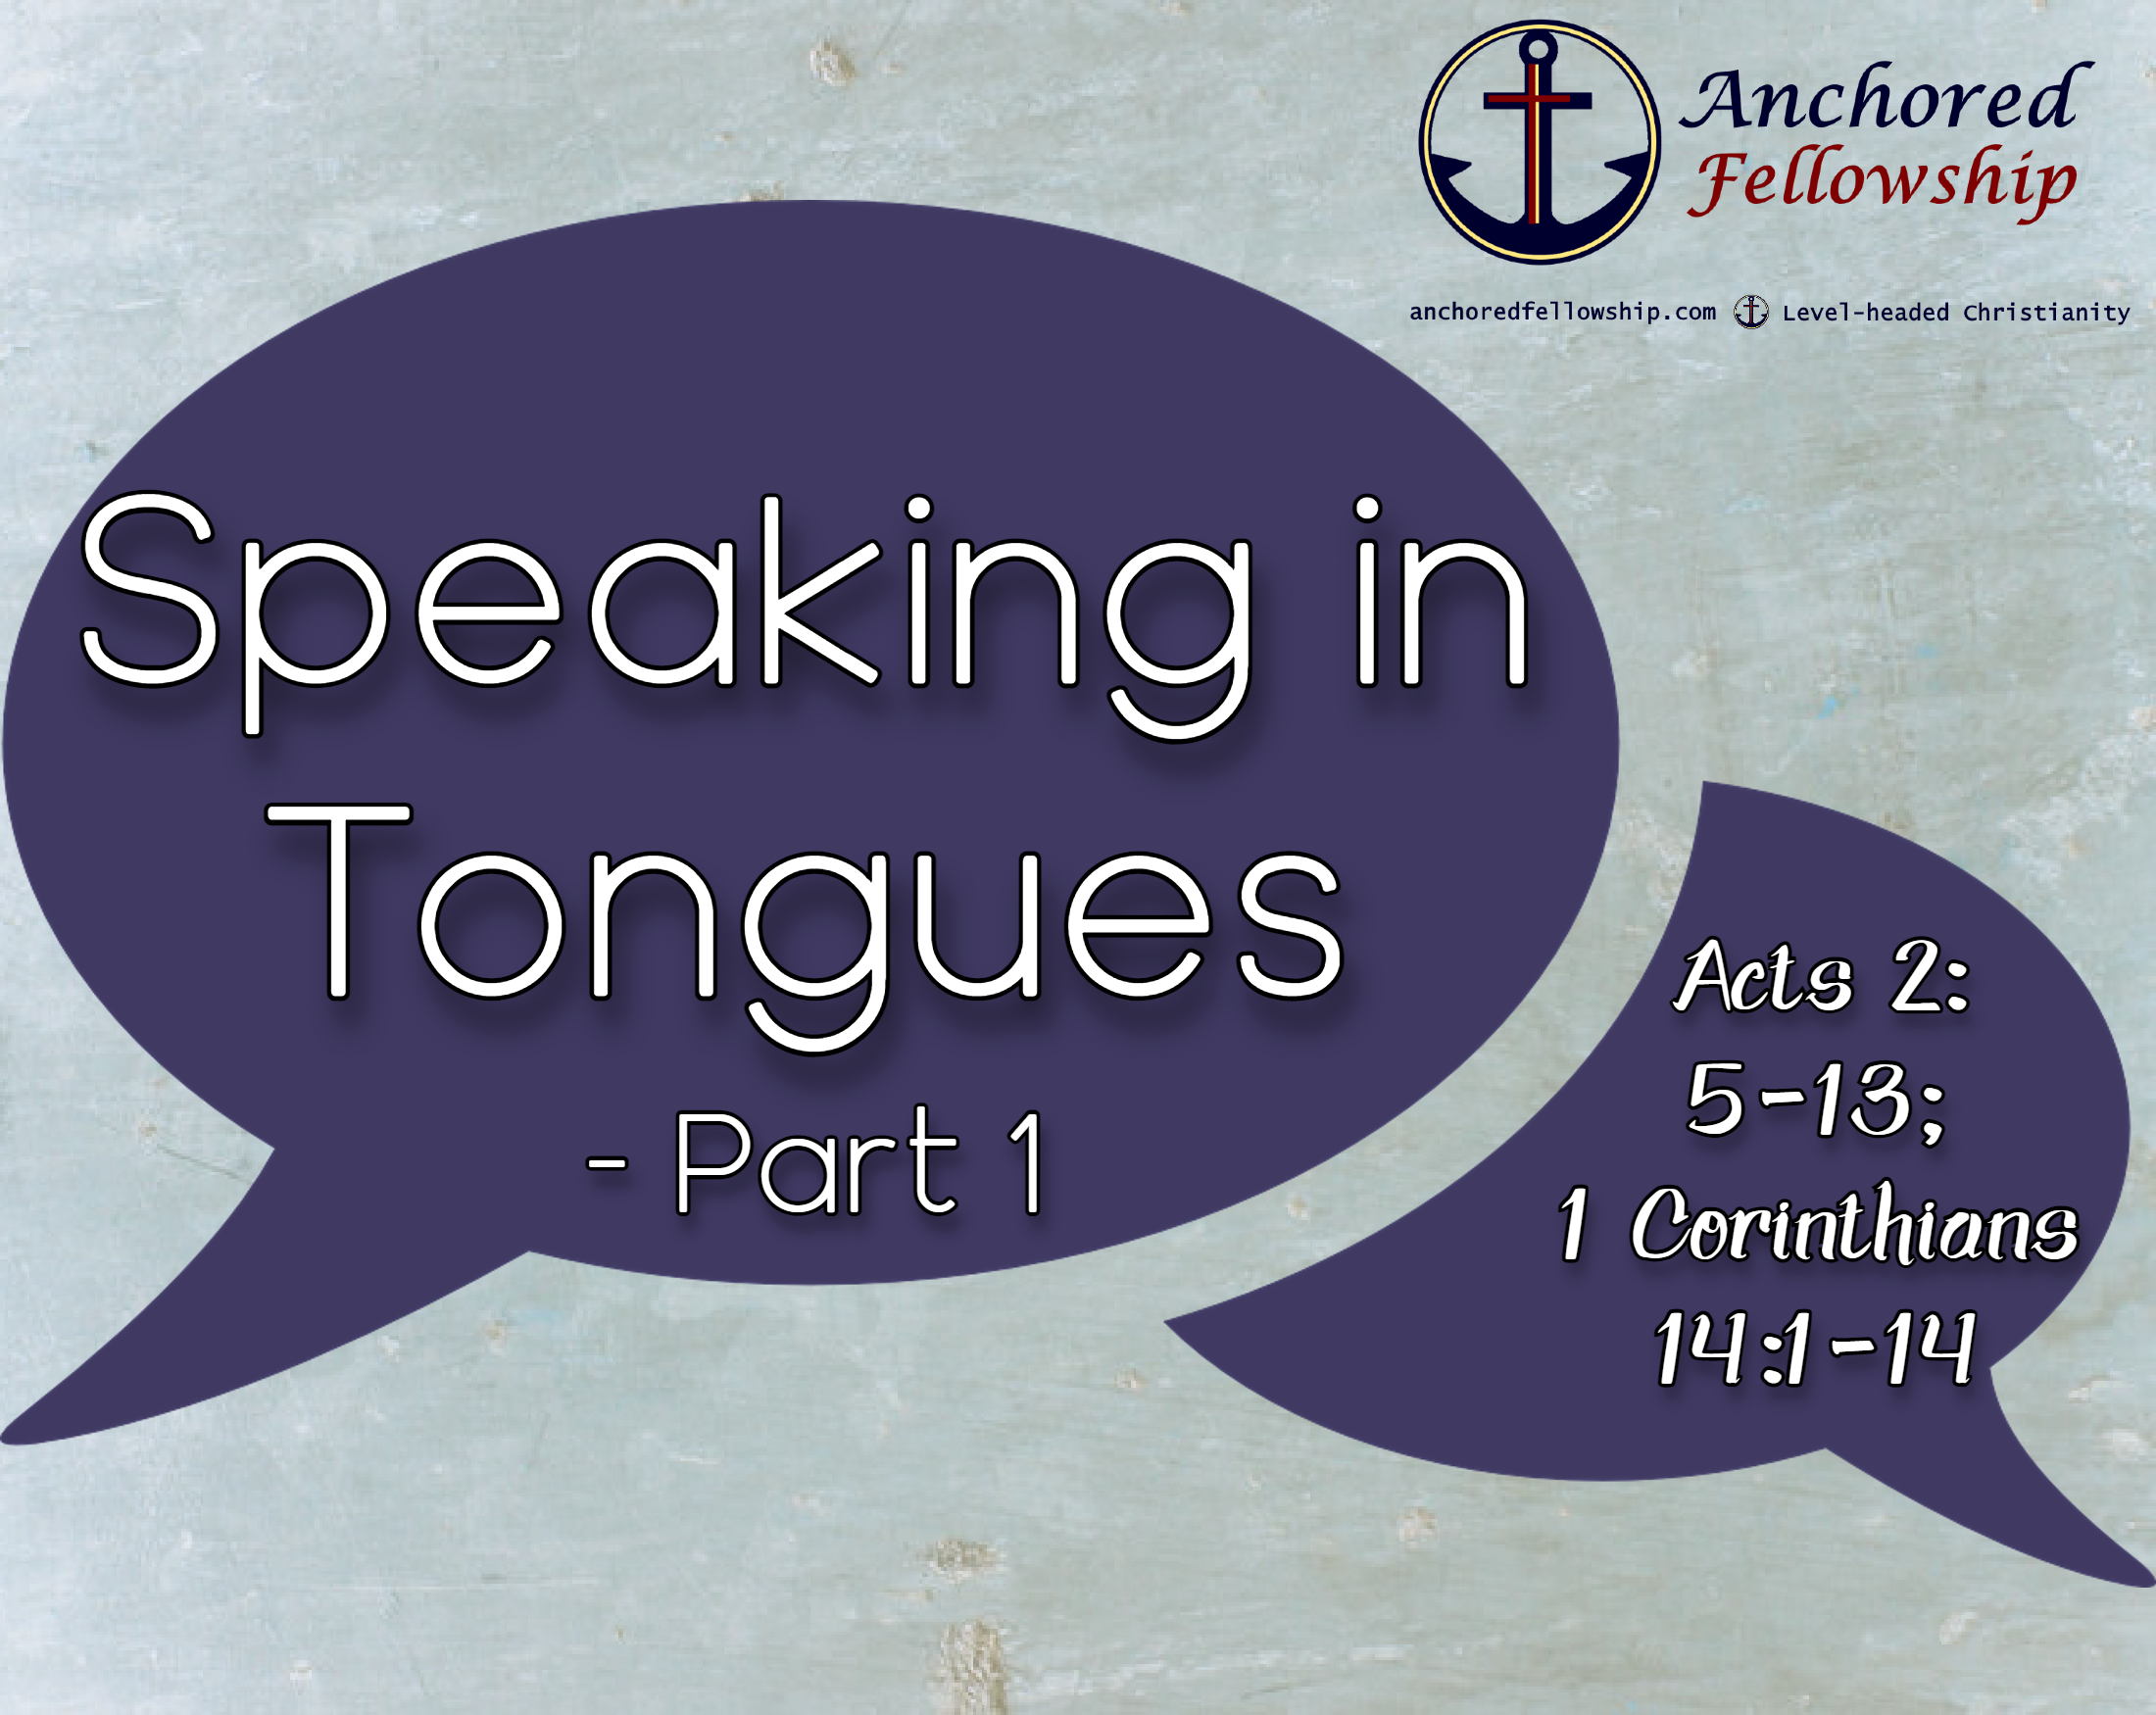 Speaking in Tongues - Part 1 Image